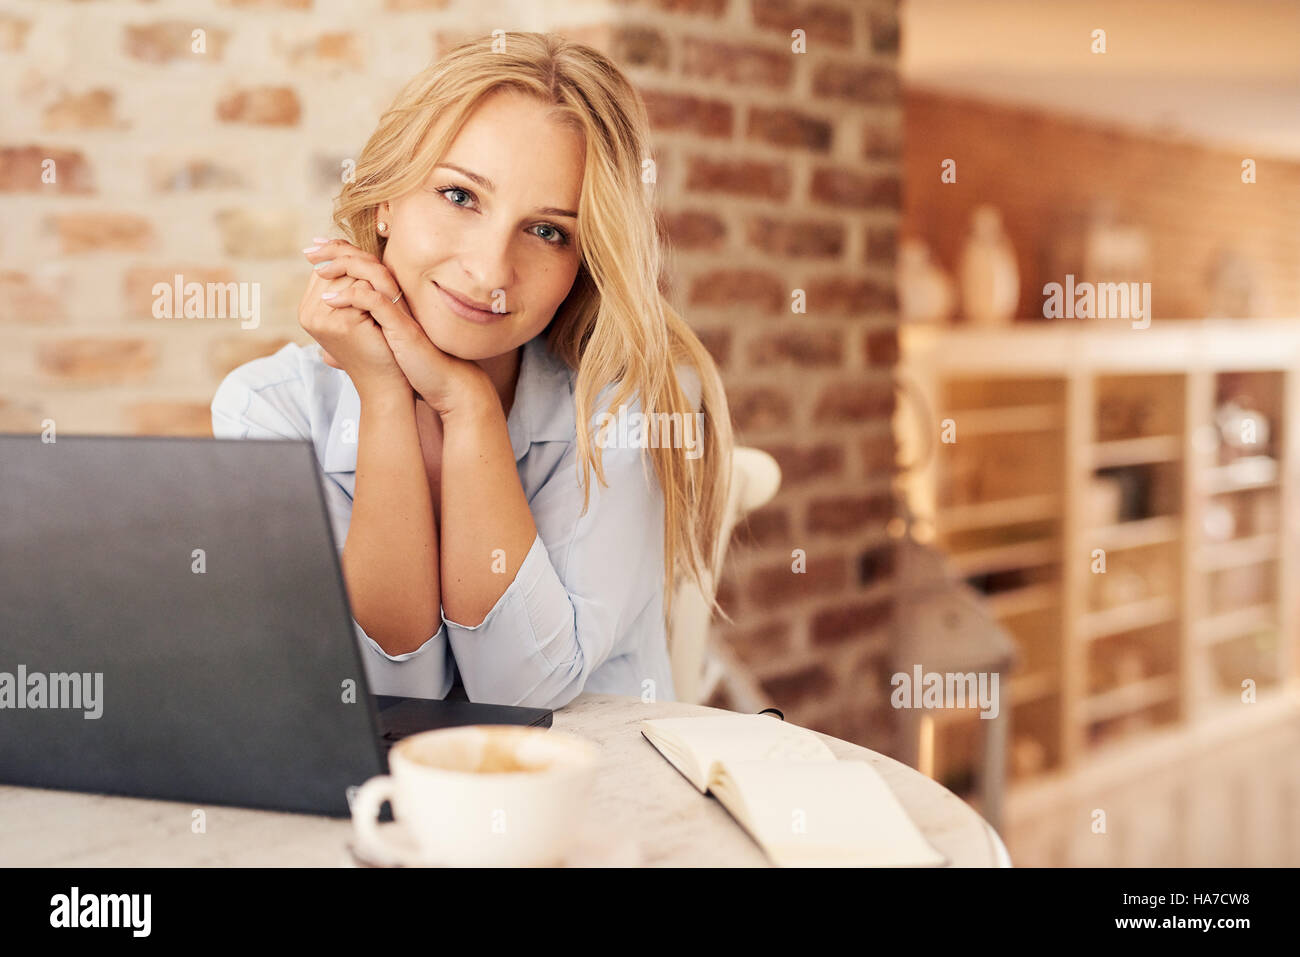 Attractive young woman using a laptop at home Stock Photo